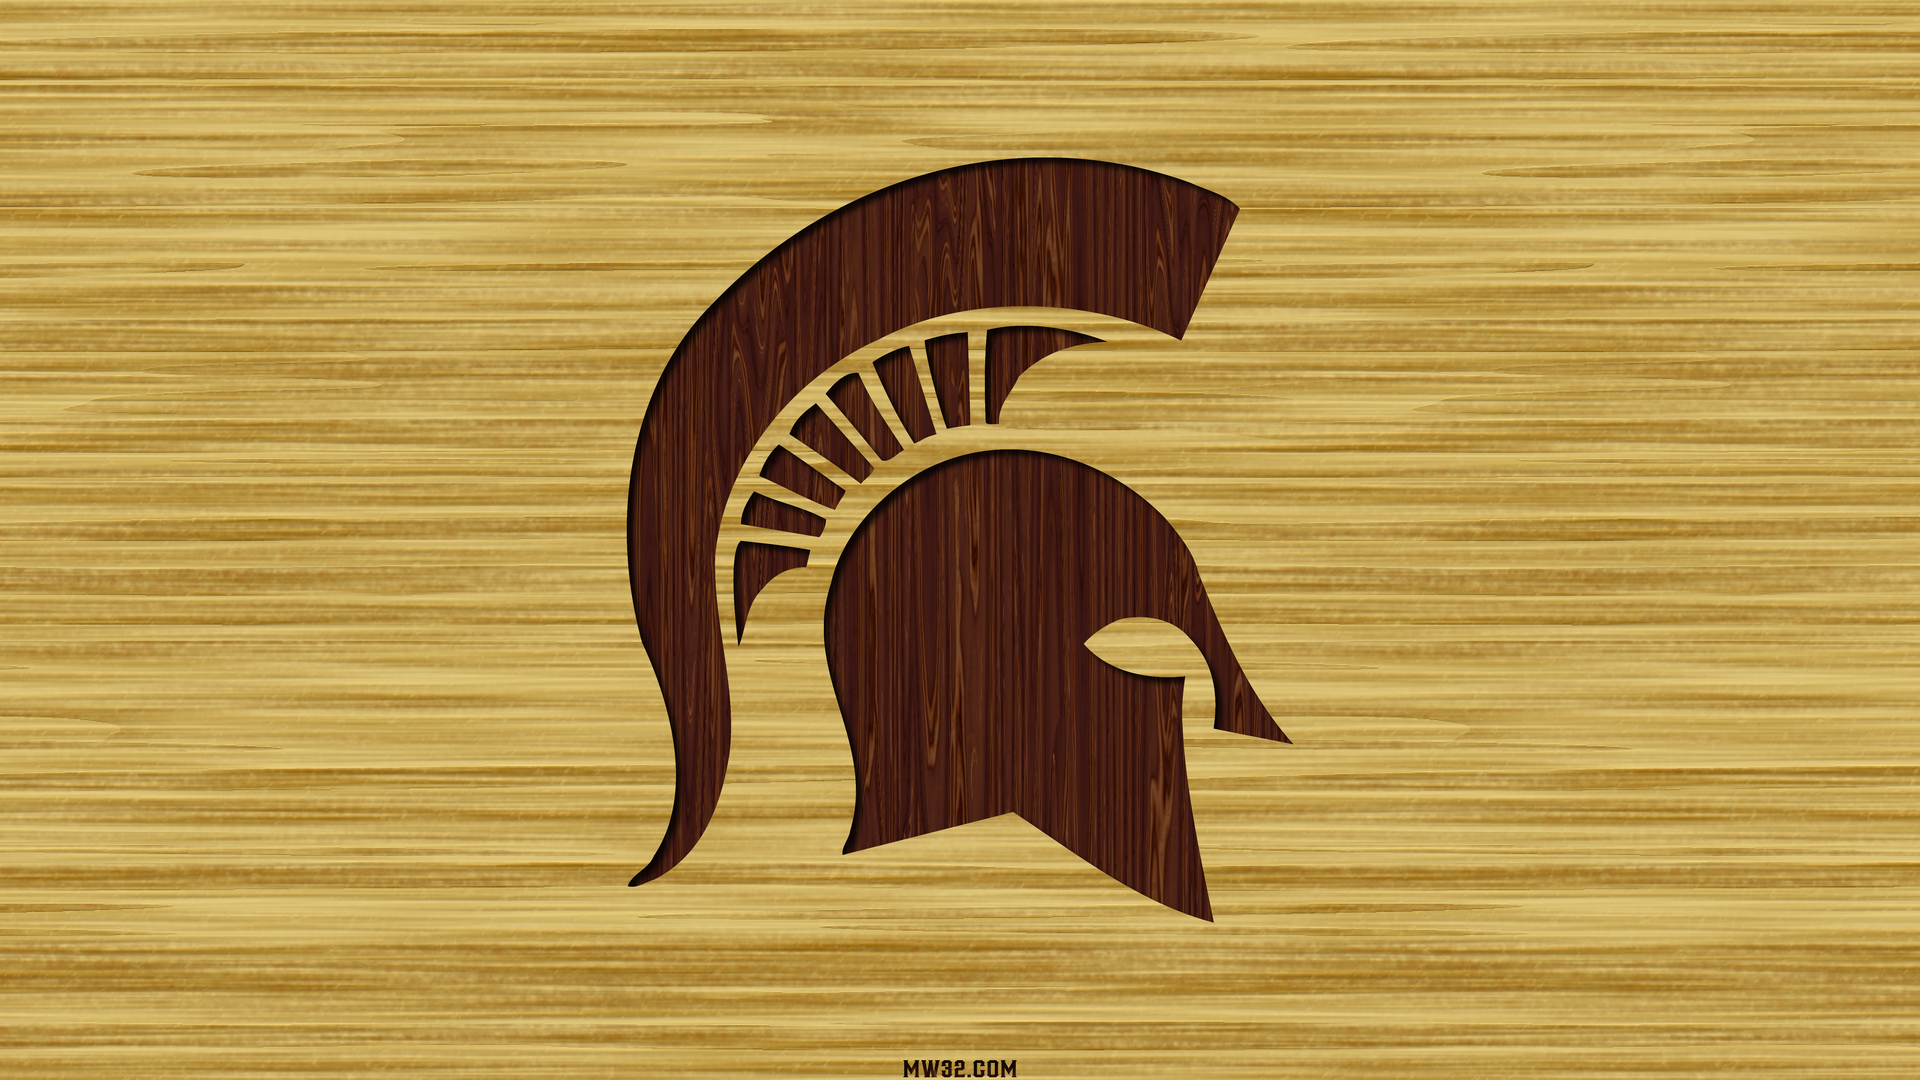 Michigan State Basketball Court Wallpaper Images Pictures   Becuo